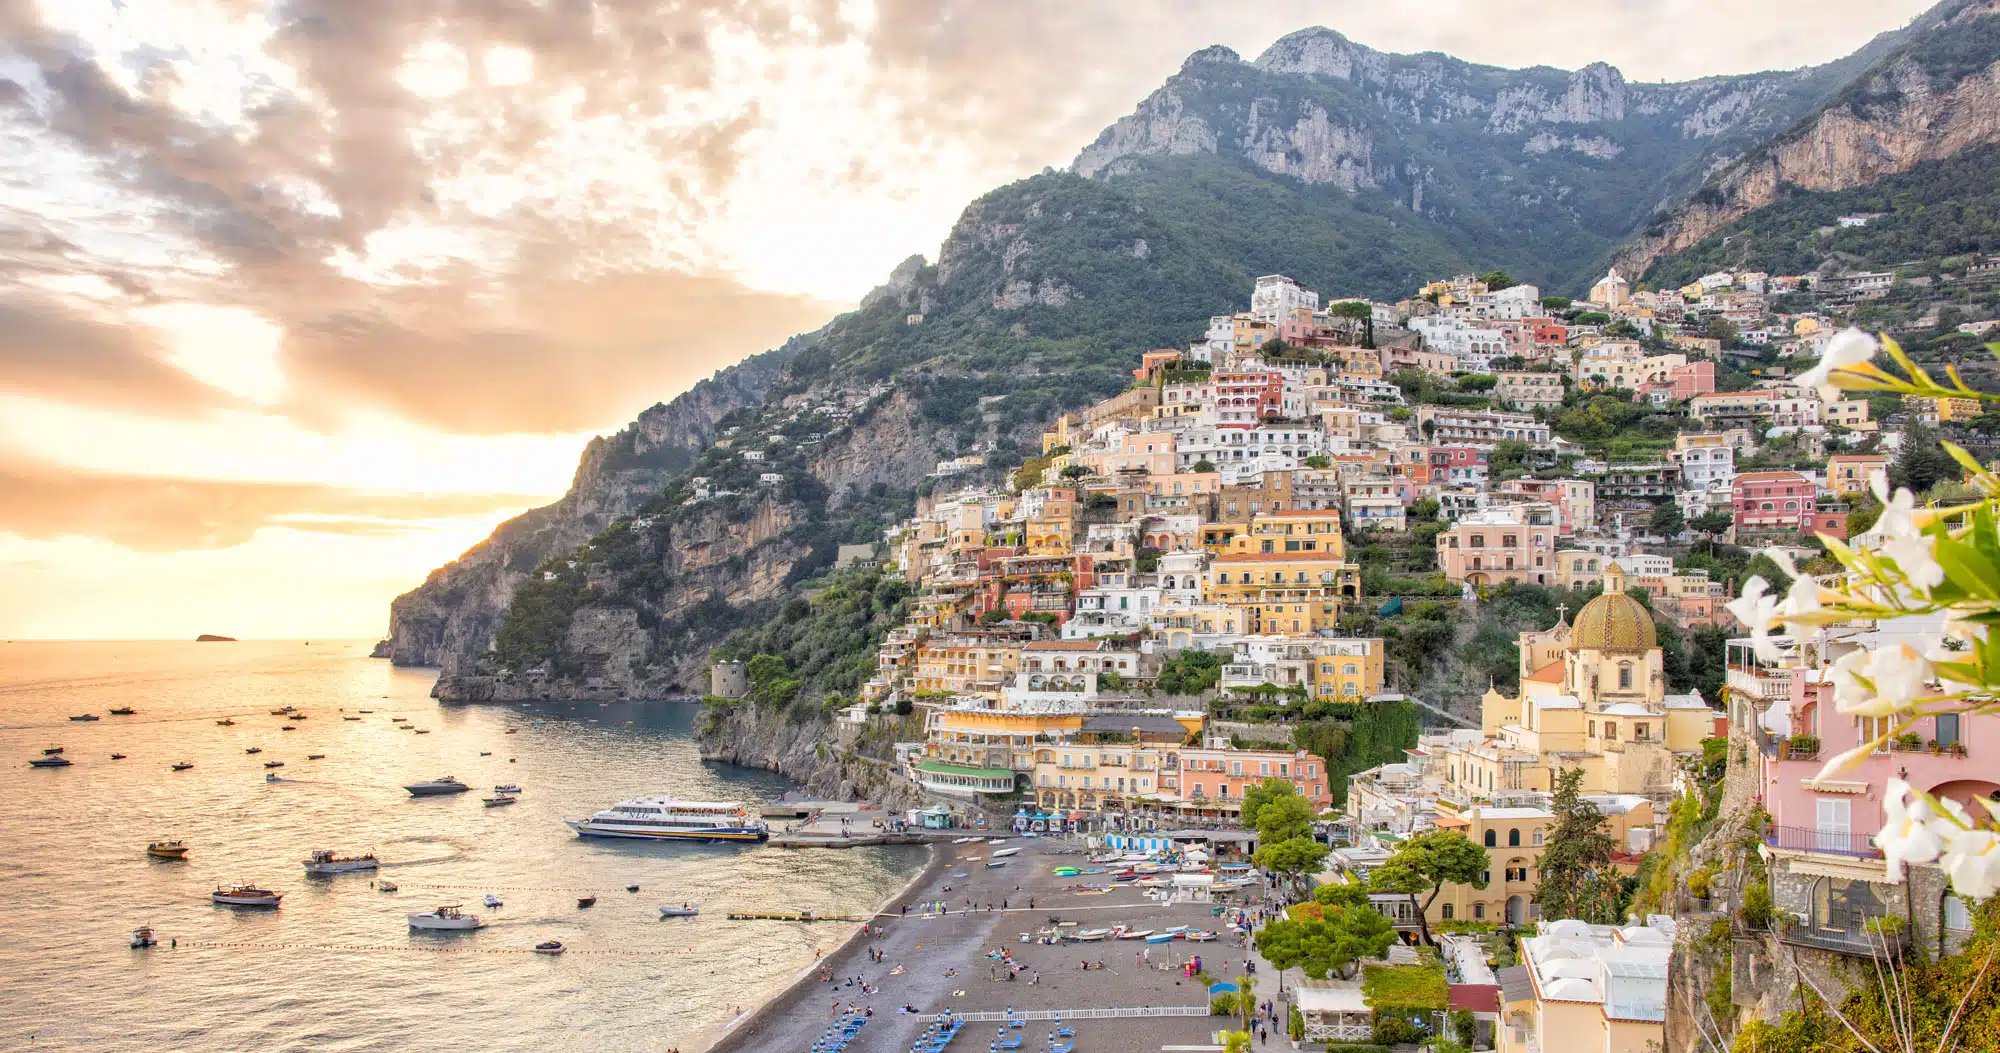 Featured image for “Amalfi Coast Itinerary: 5 Ways to Plan Your Trip”